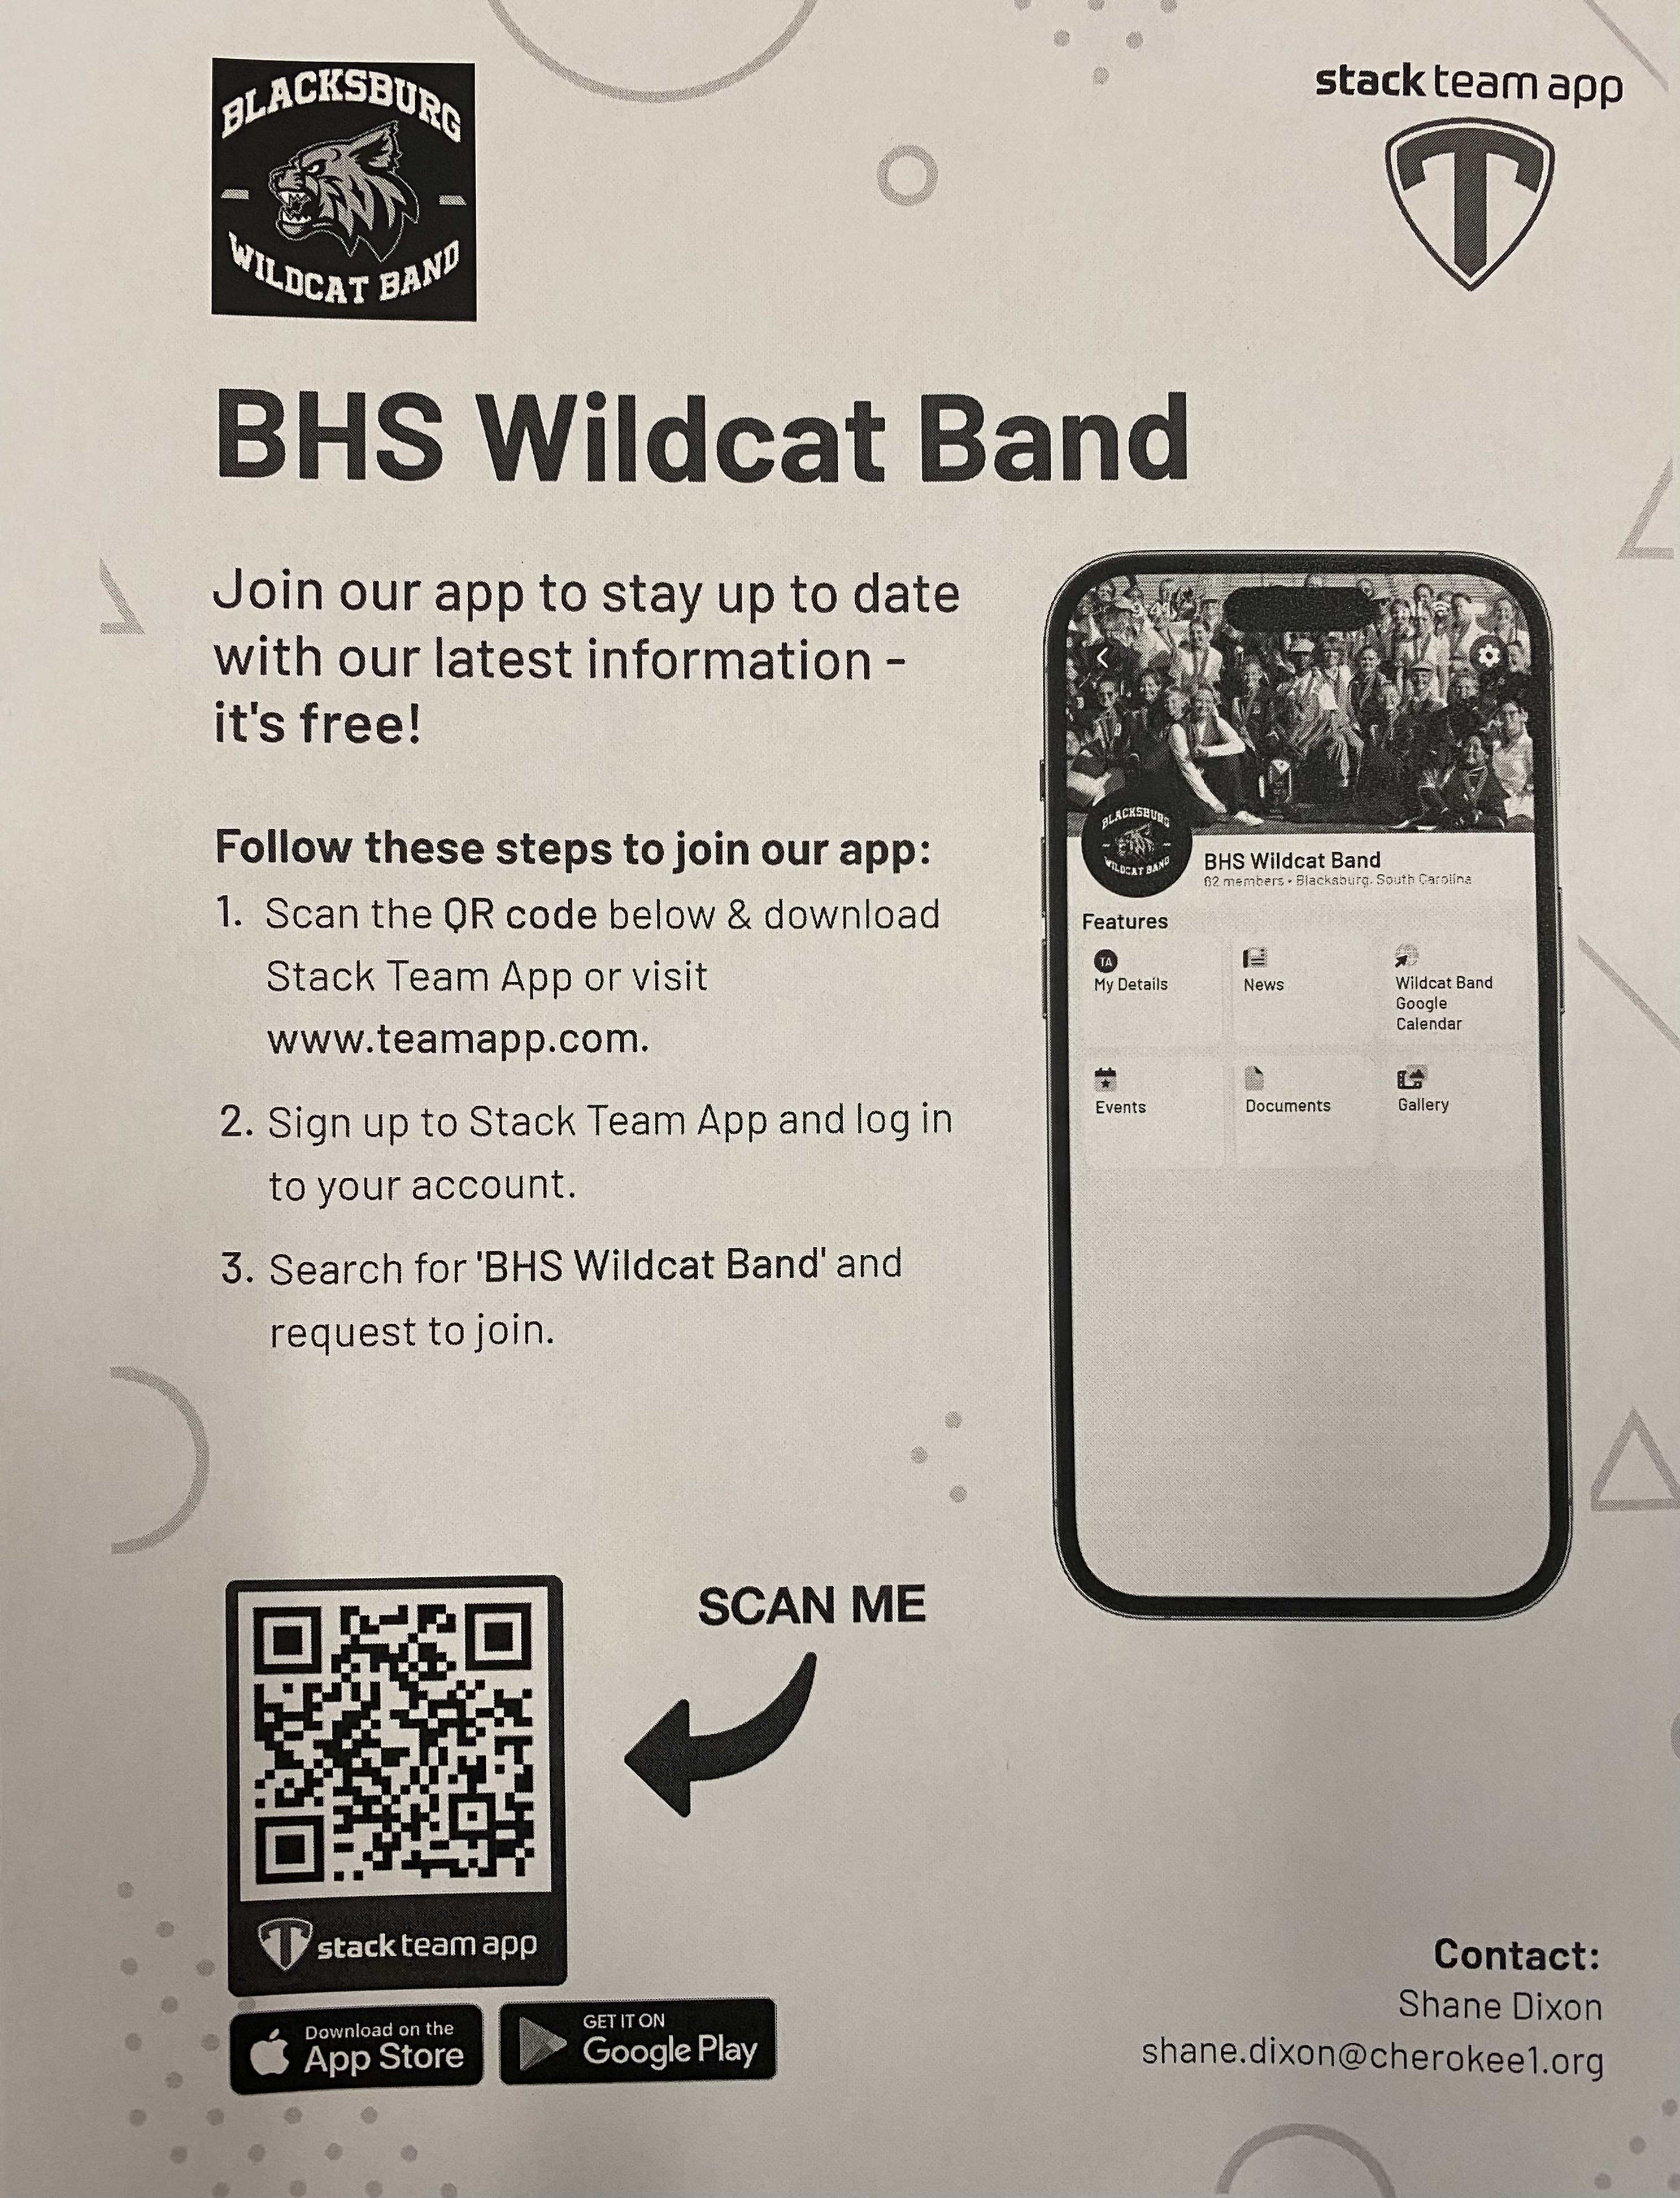 Stackteam App information. Scan QR code and download. Sign up to stack team app and log in to your account. searcch for BHS Wildcat Band and request to join.